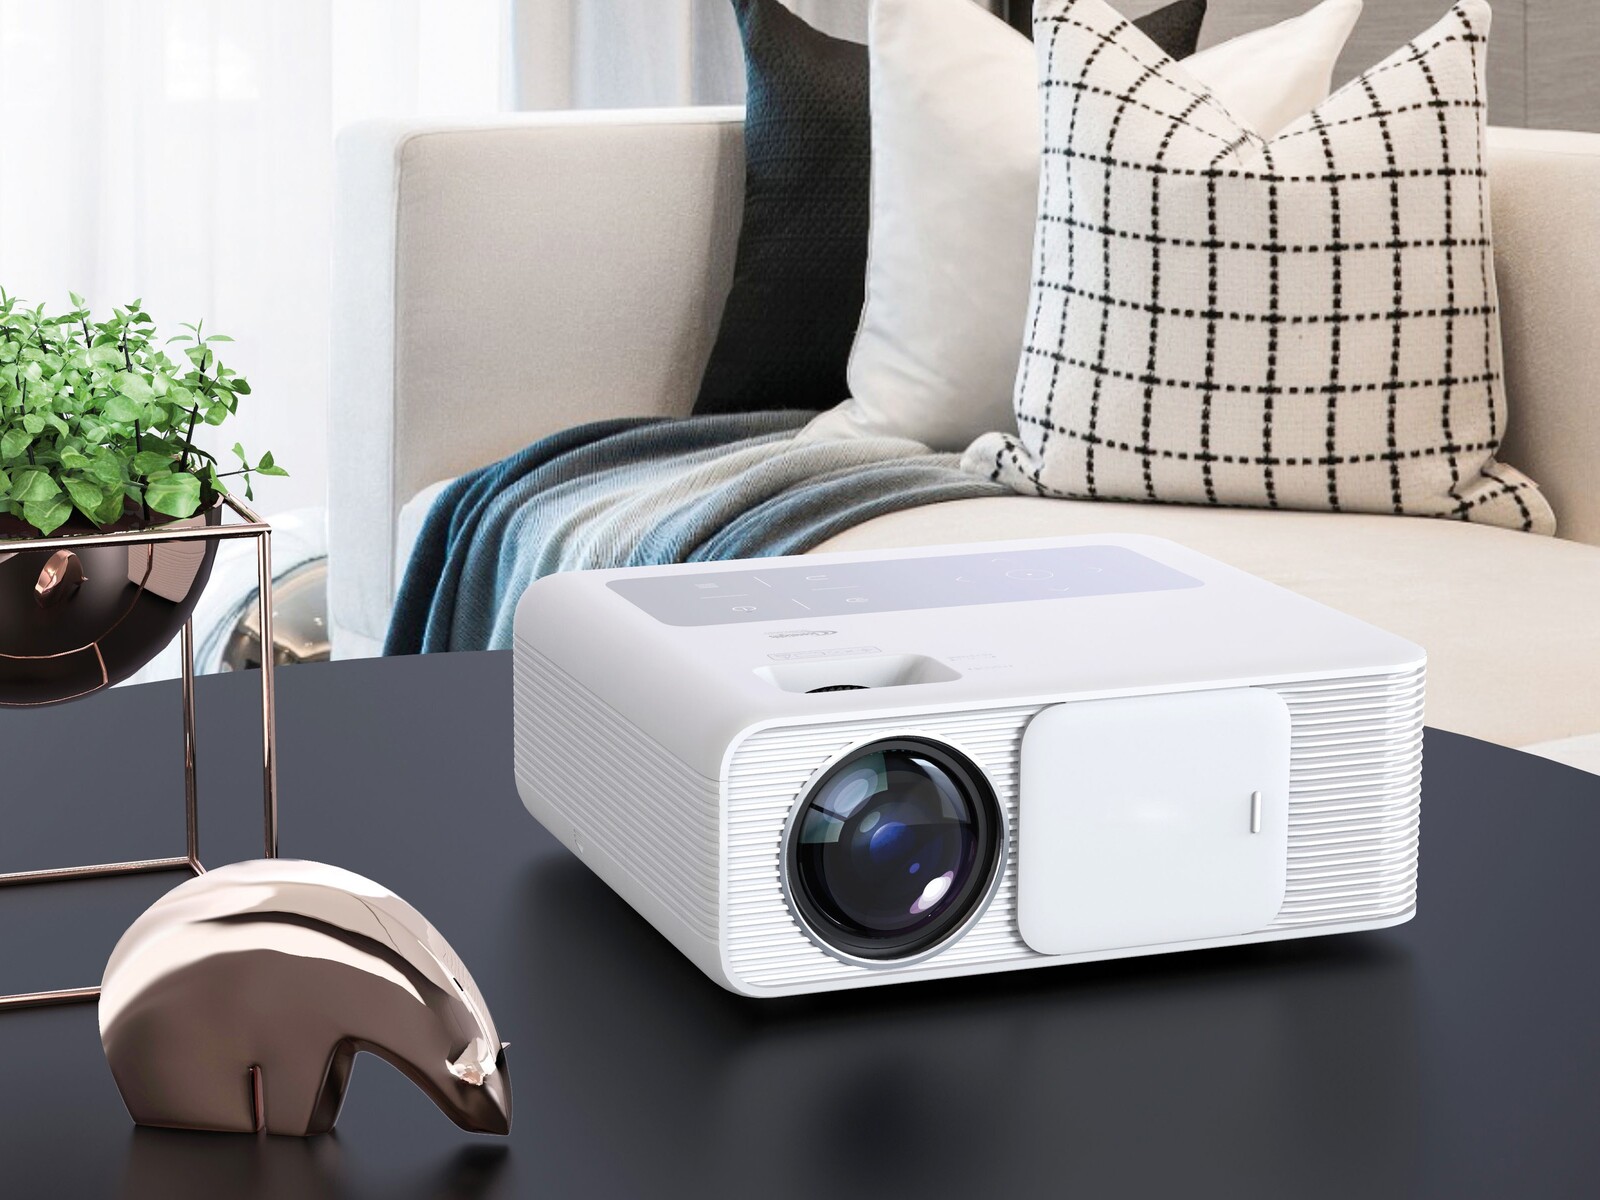 LED Or LCD Projector: Which Is Better